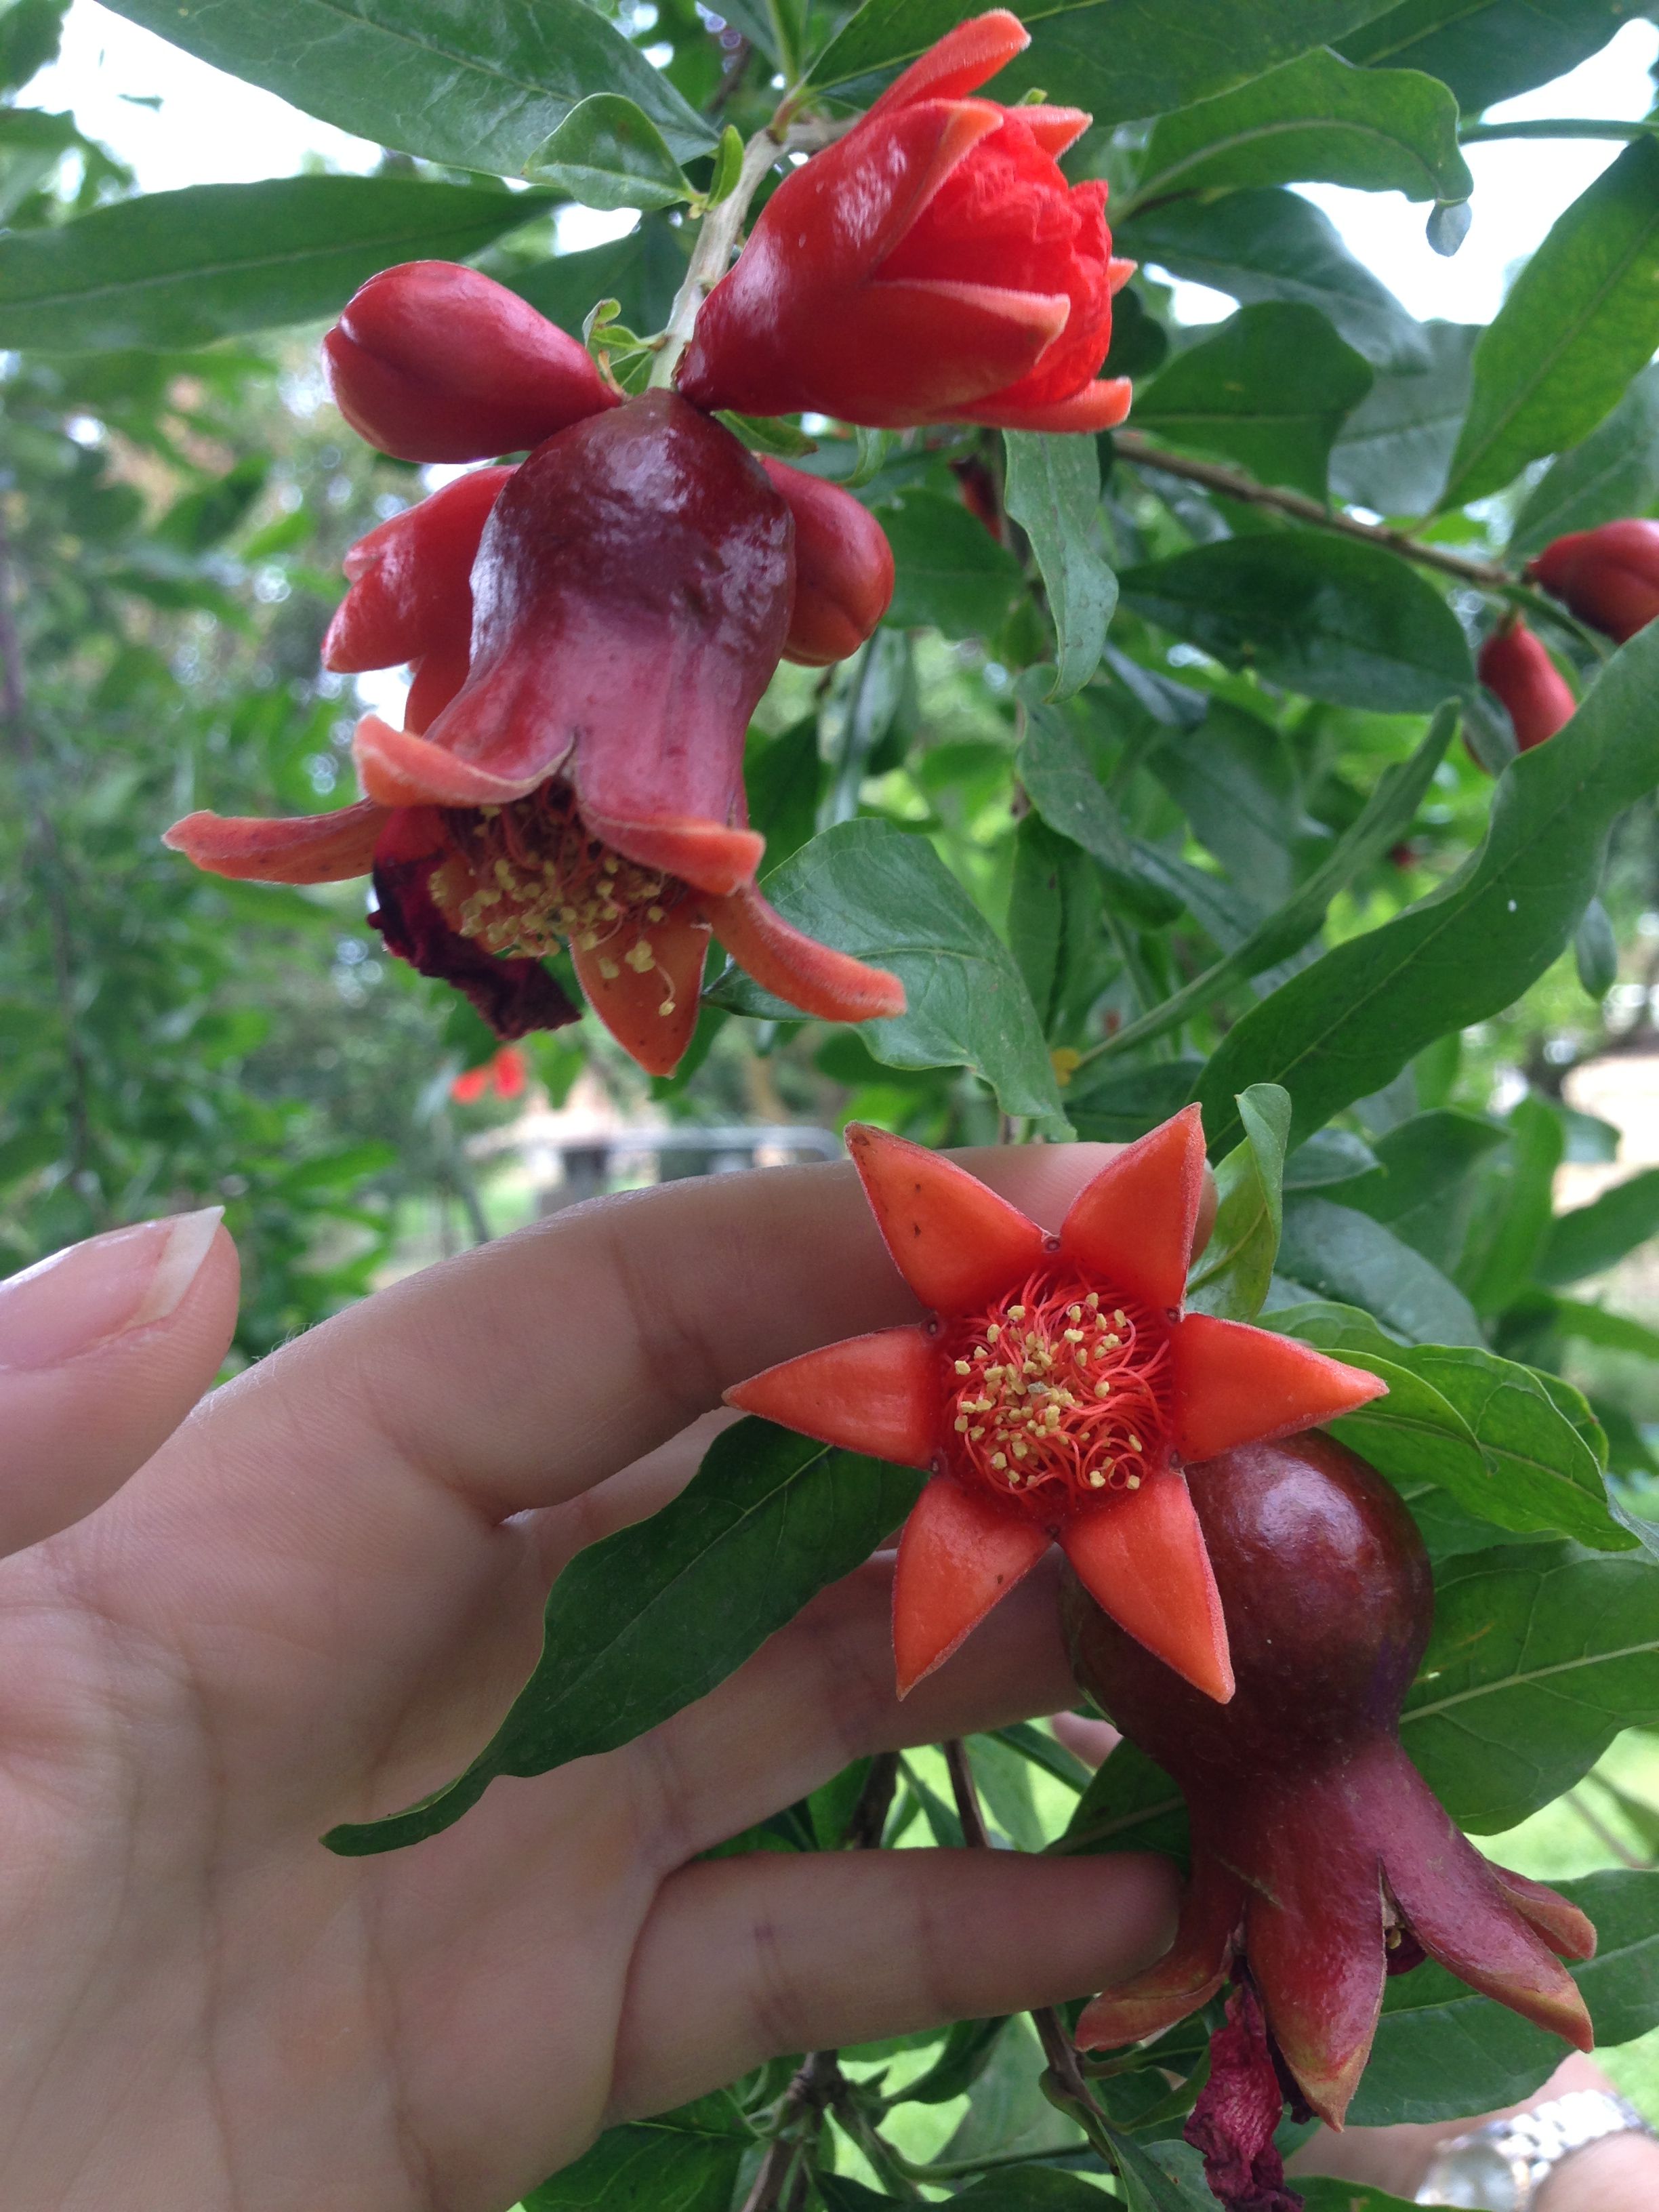 Pomegranate in bloom photo